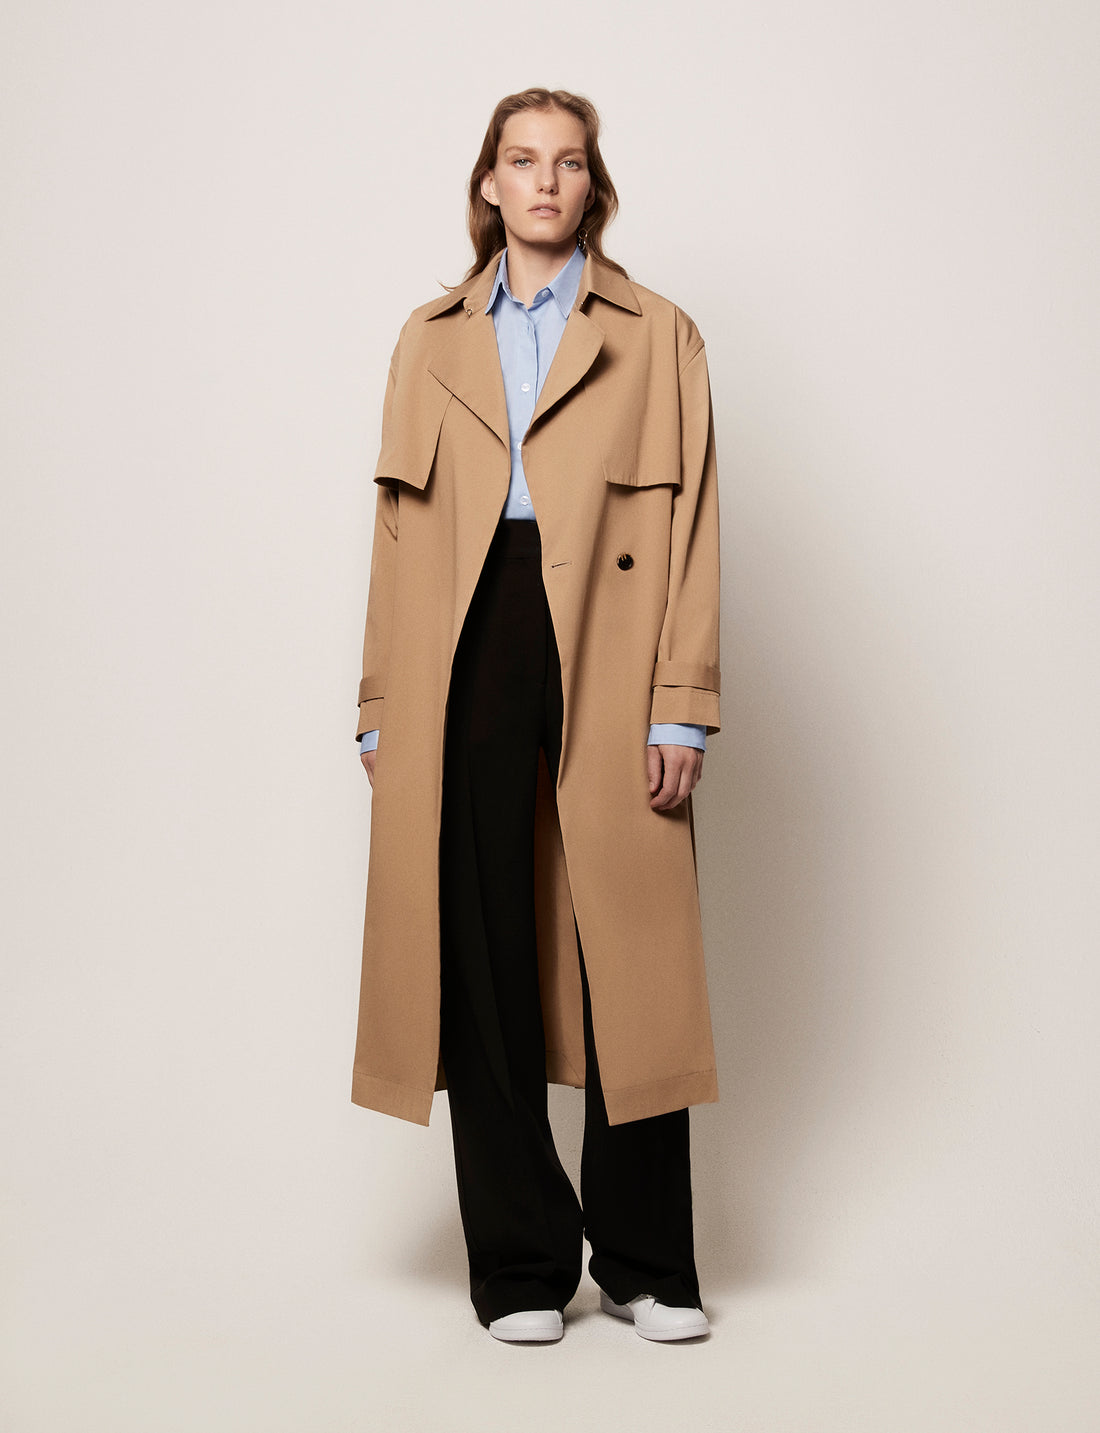 Another Tomorrow Women's Tailored Cashmere Coat